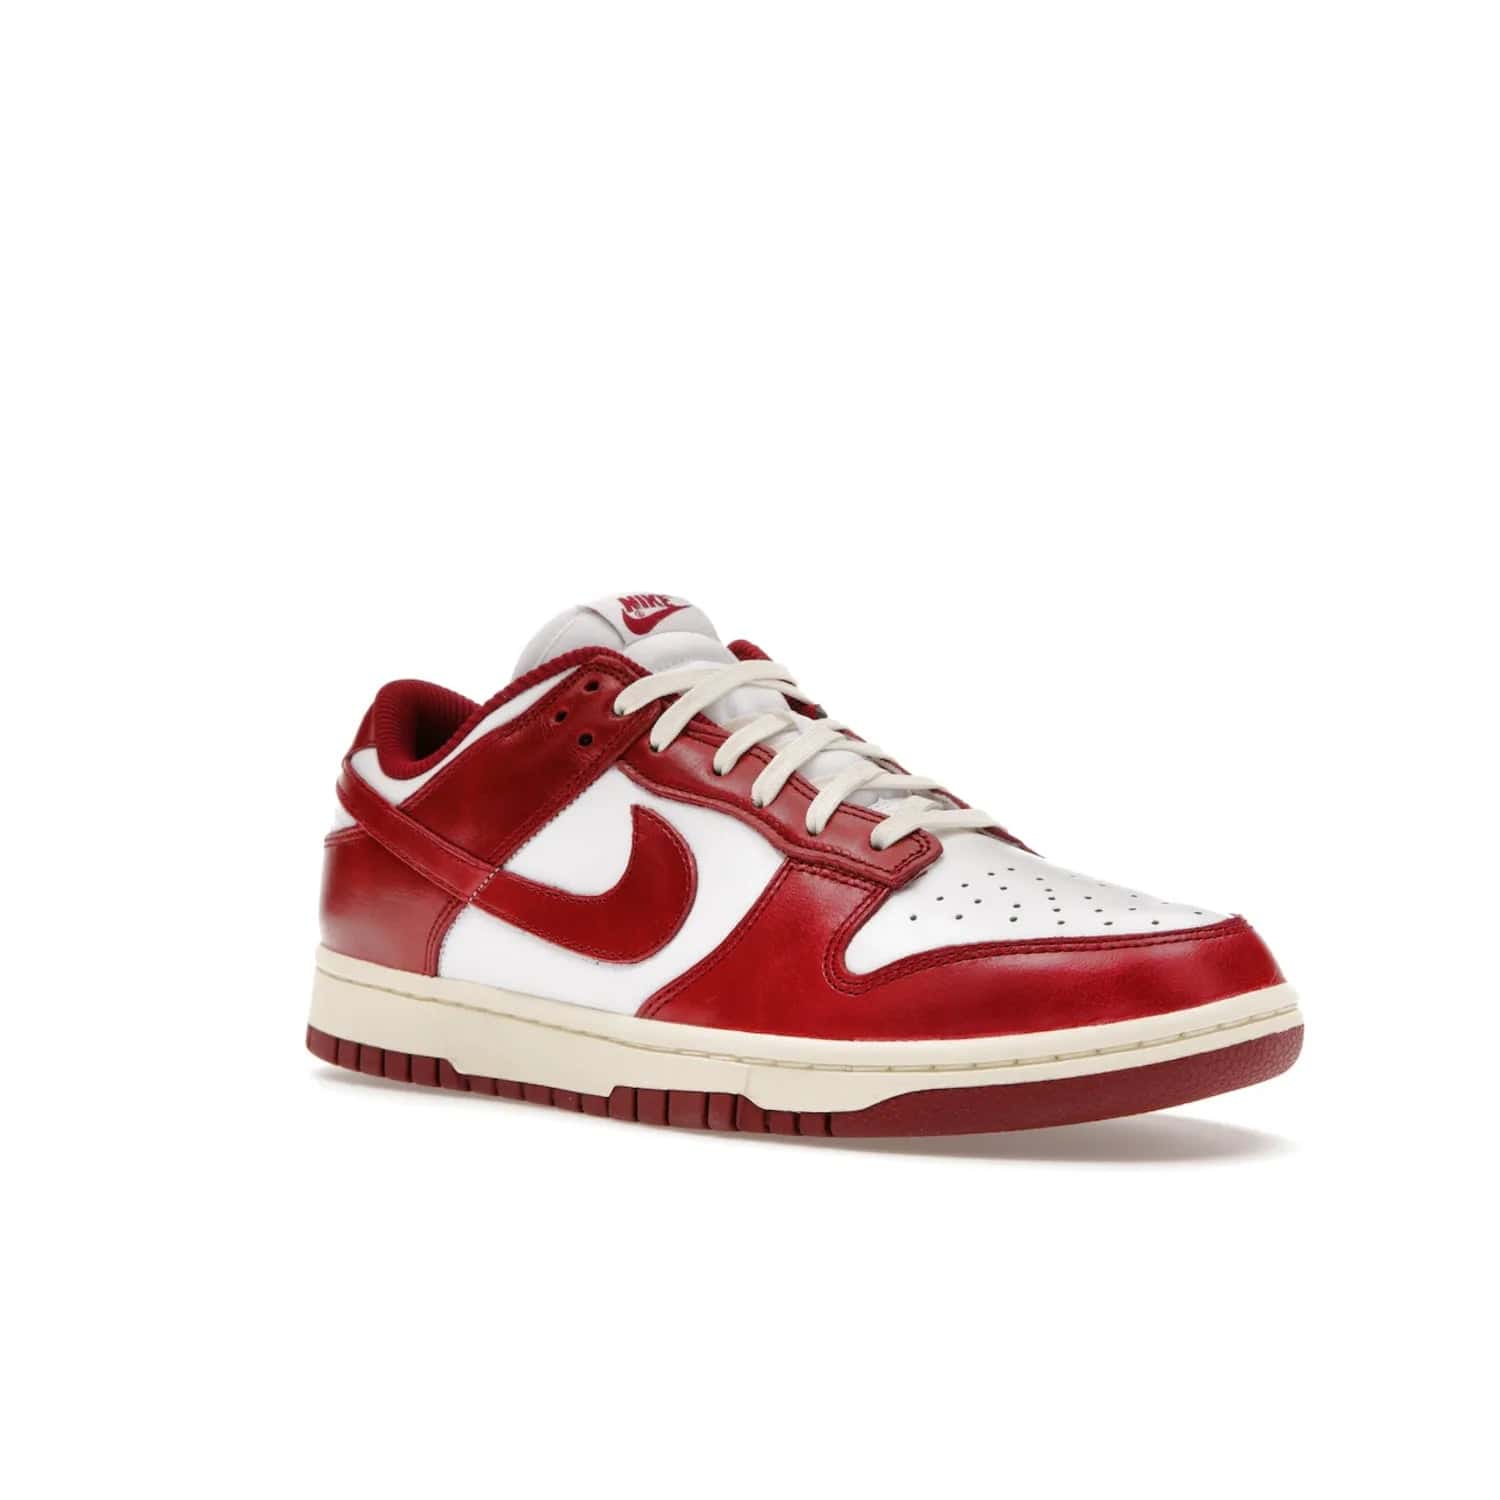 Nike Dunk Low PRM Vintage Team Red (Women's) - Image 5 - Only at www.BallersClubKickz.com - Shop the stylish Nike Dunk Low PRM Vintage Team Red. Signature Red and White leather with Coconut Milk midsoles for an aged finish. 21 April 2023 release.